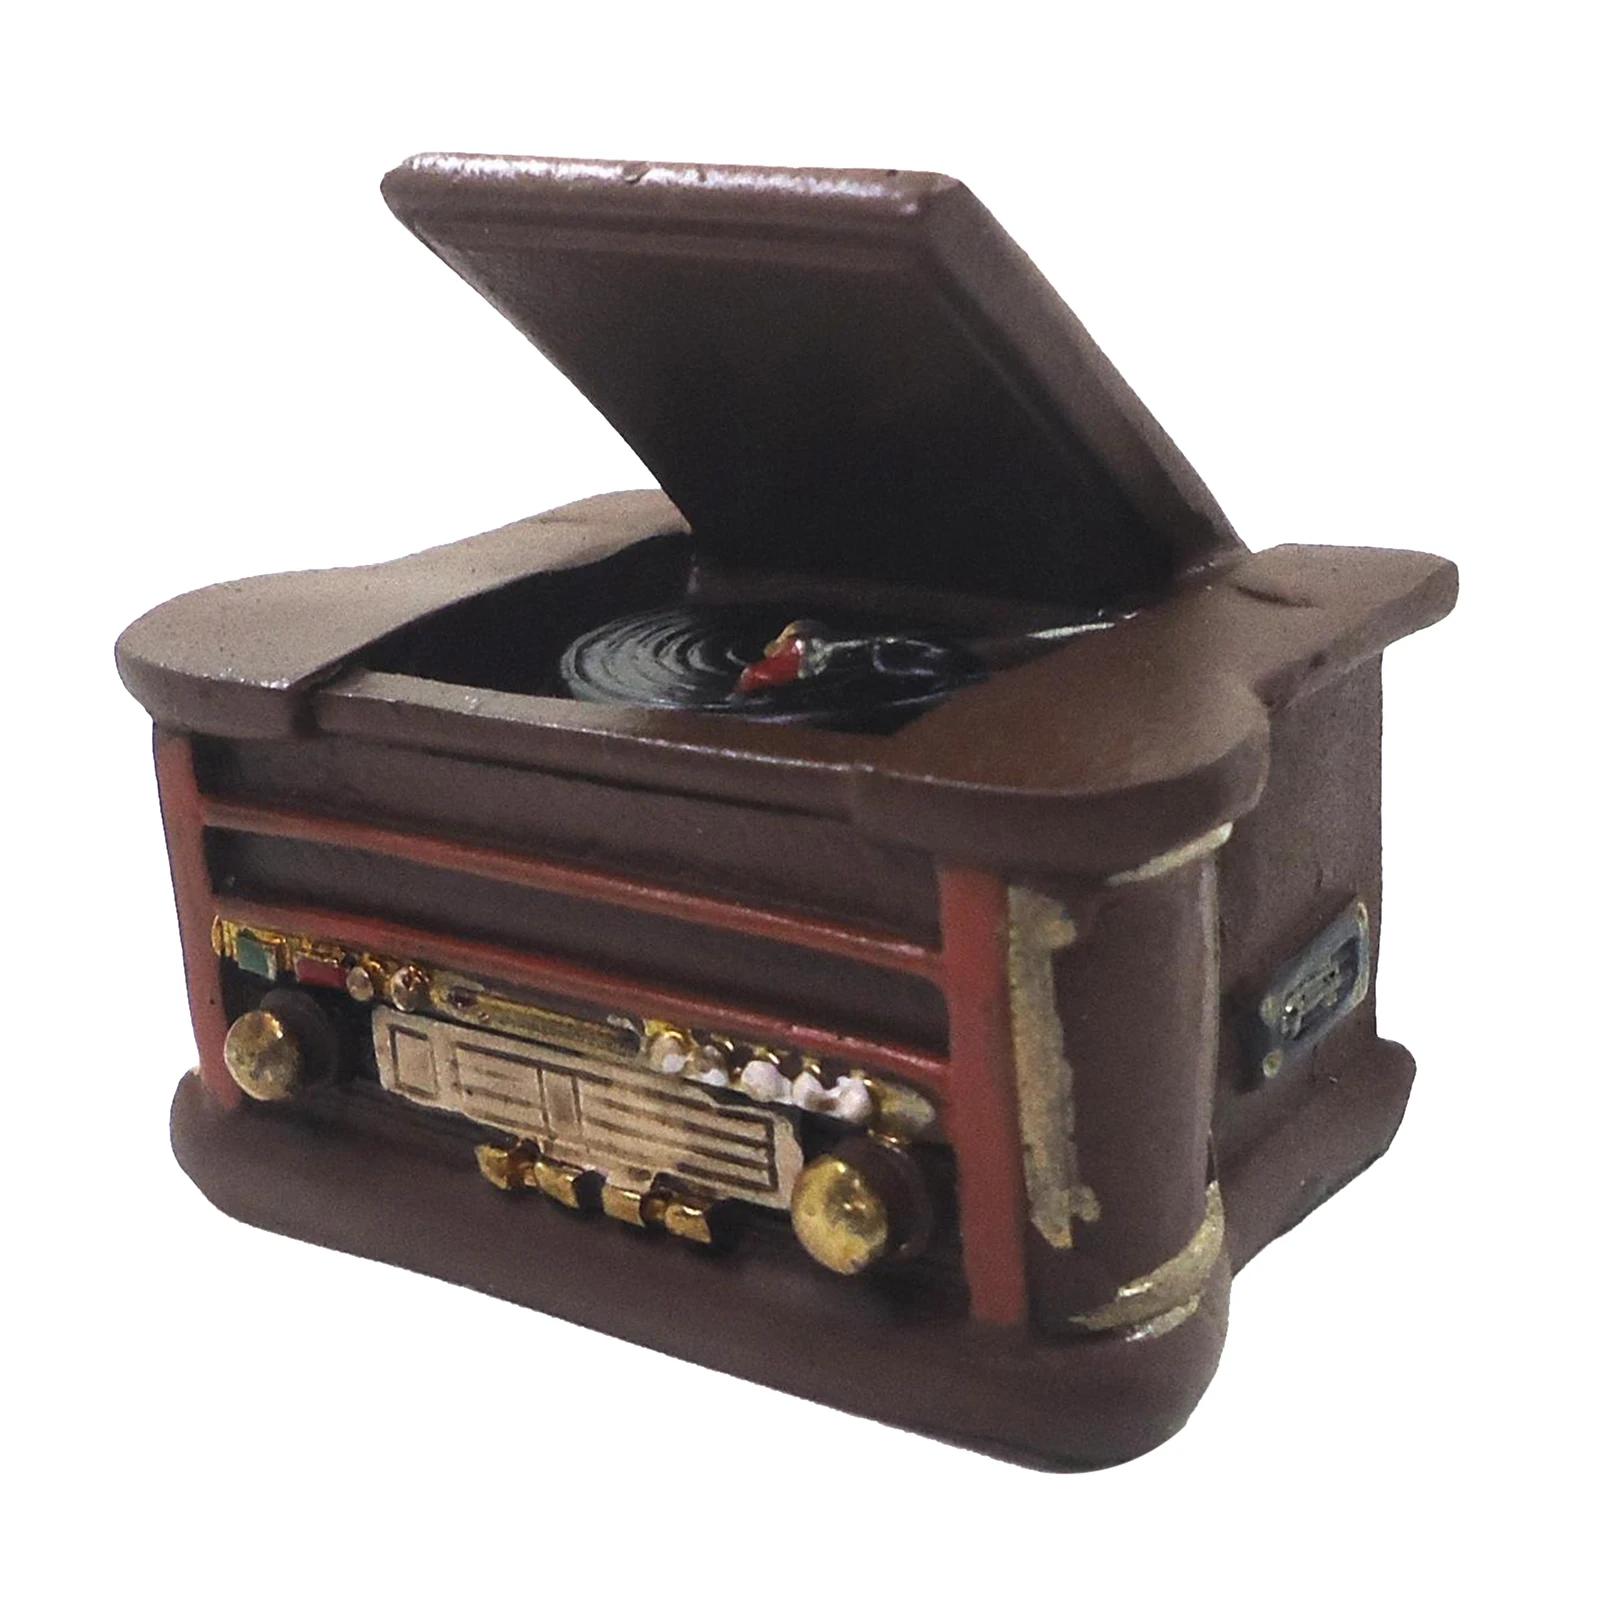 Retro 1/6 Scale Dolls House Resin Record Player Room Furniture Accessory